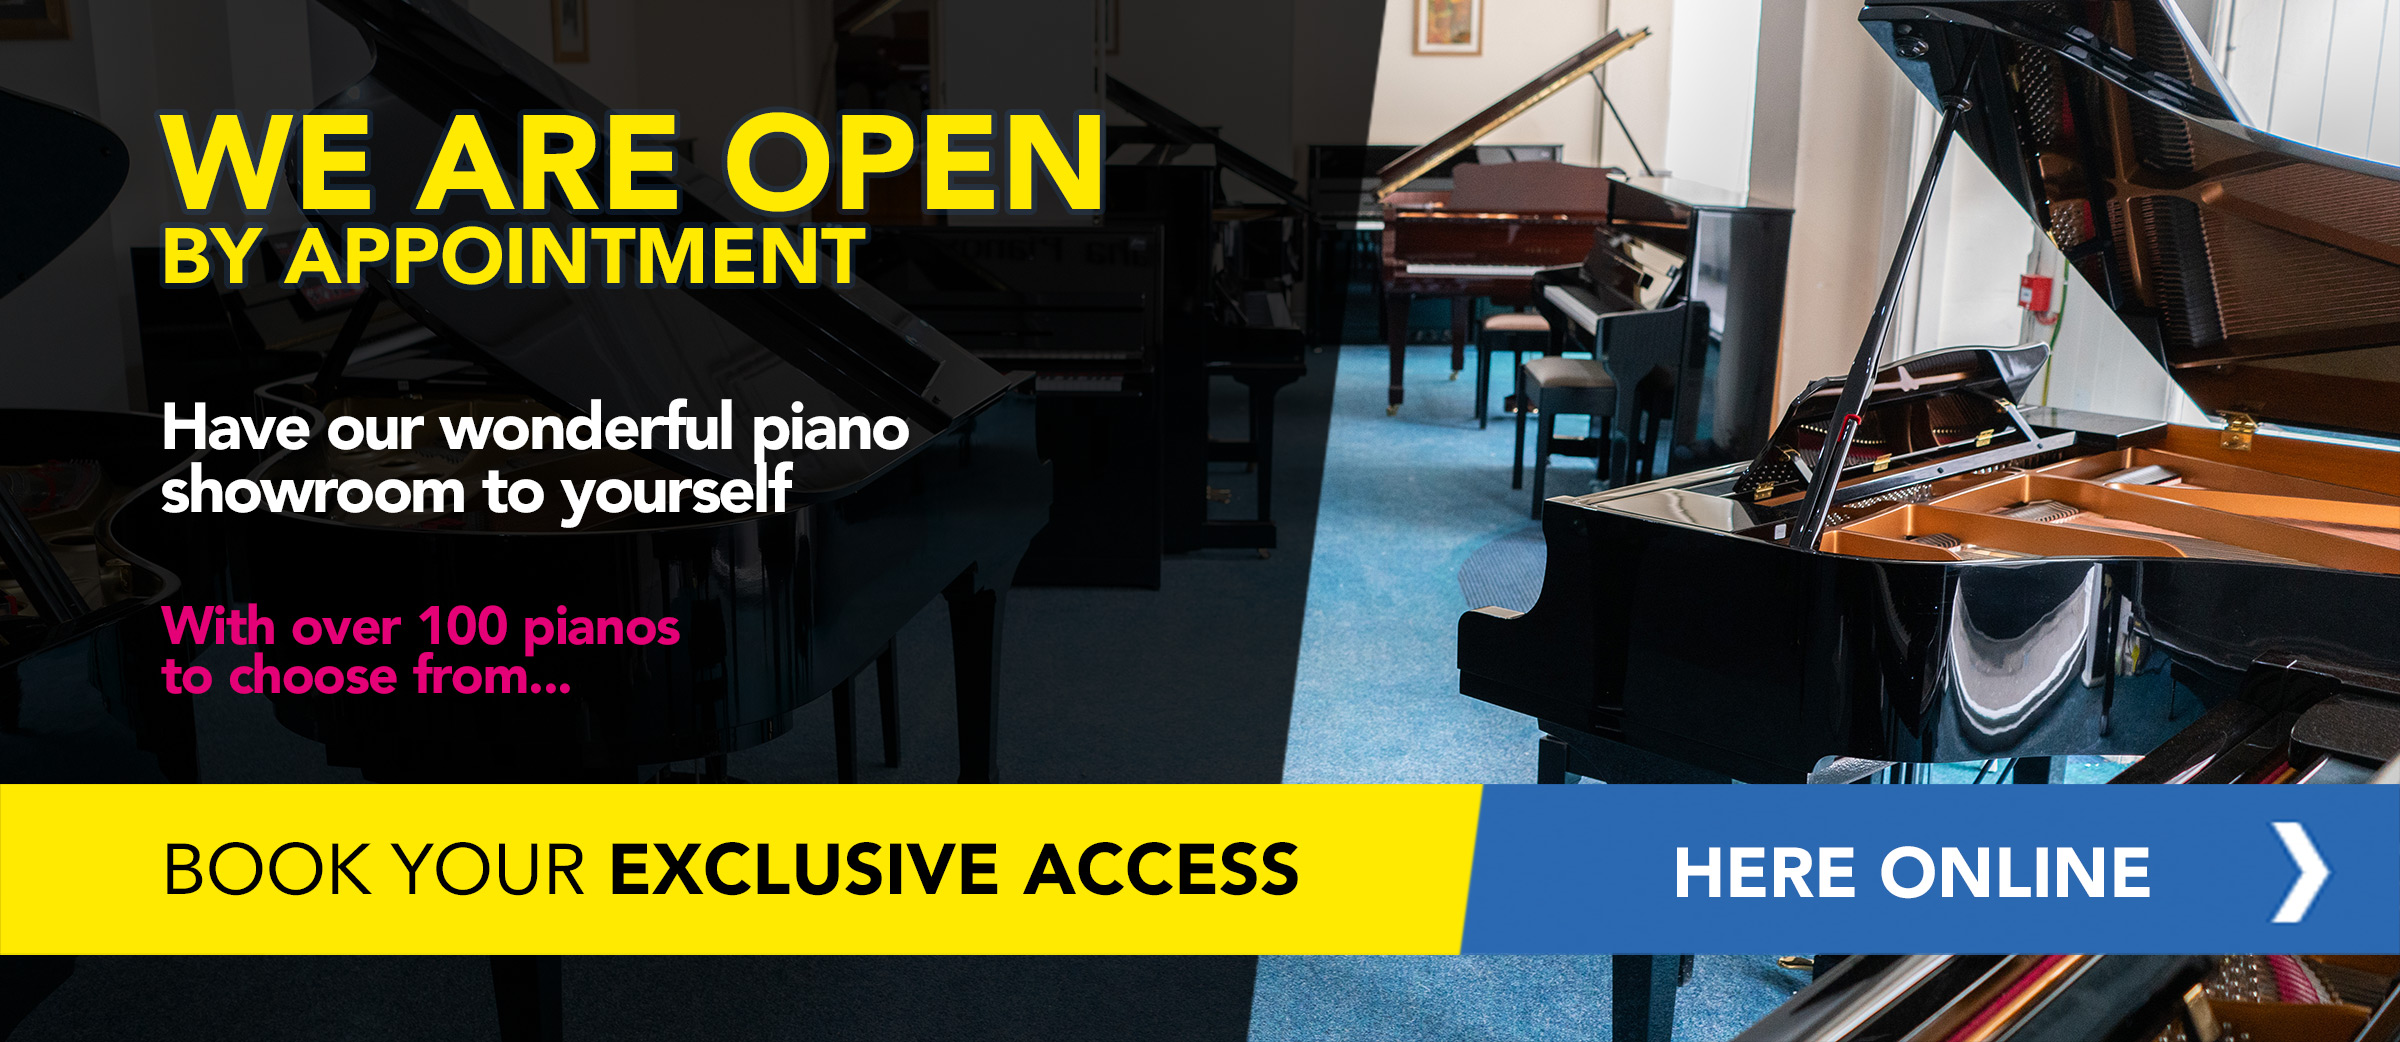 Romantiek Omgekeerde Hoe Piano for sale | Yamaha Pianos | Bechstein Bluthner Pianos and many more  Pianos for sale in Oxfordshire